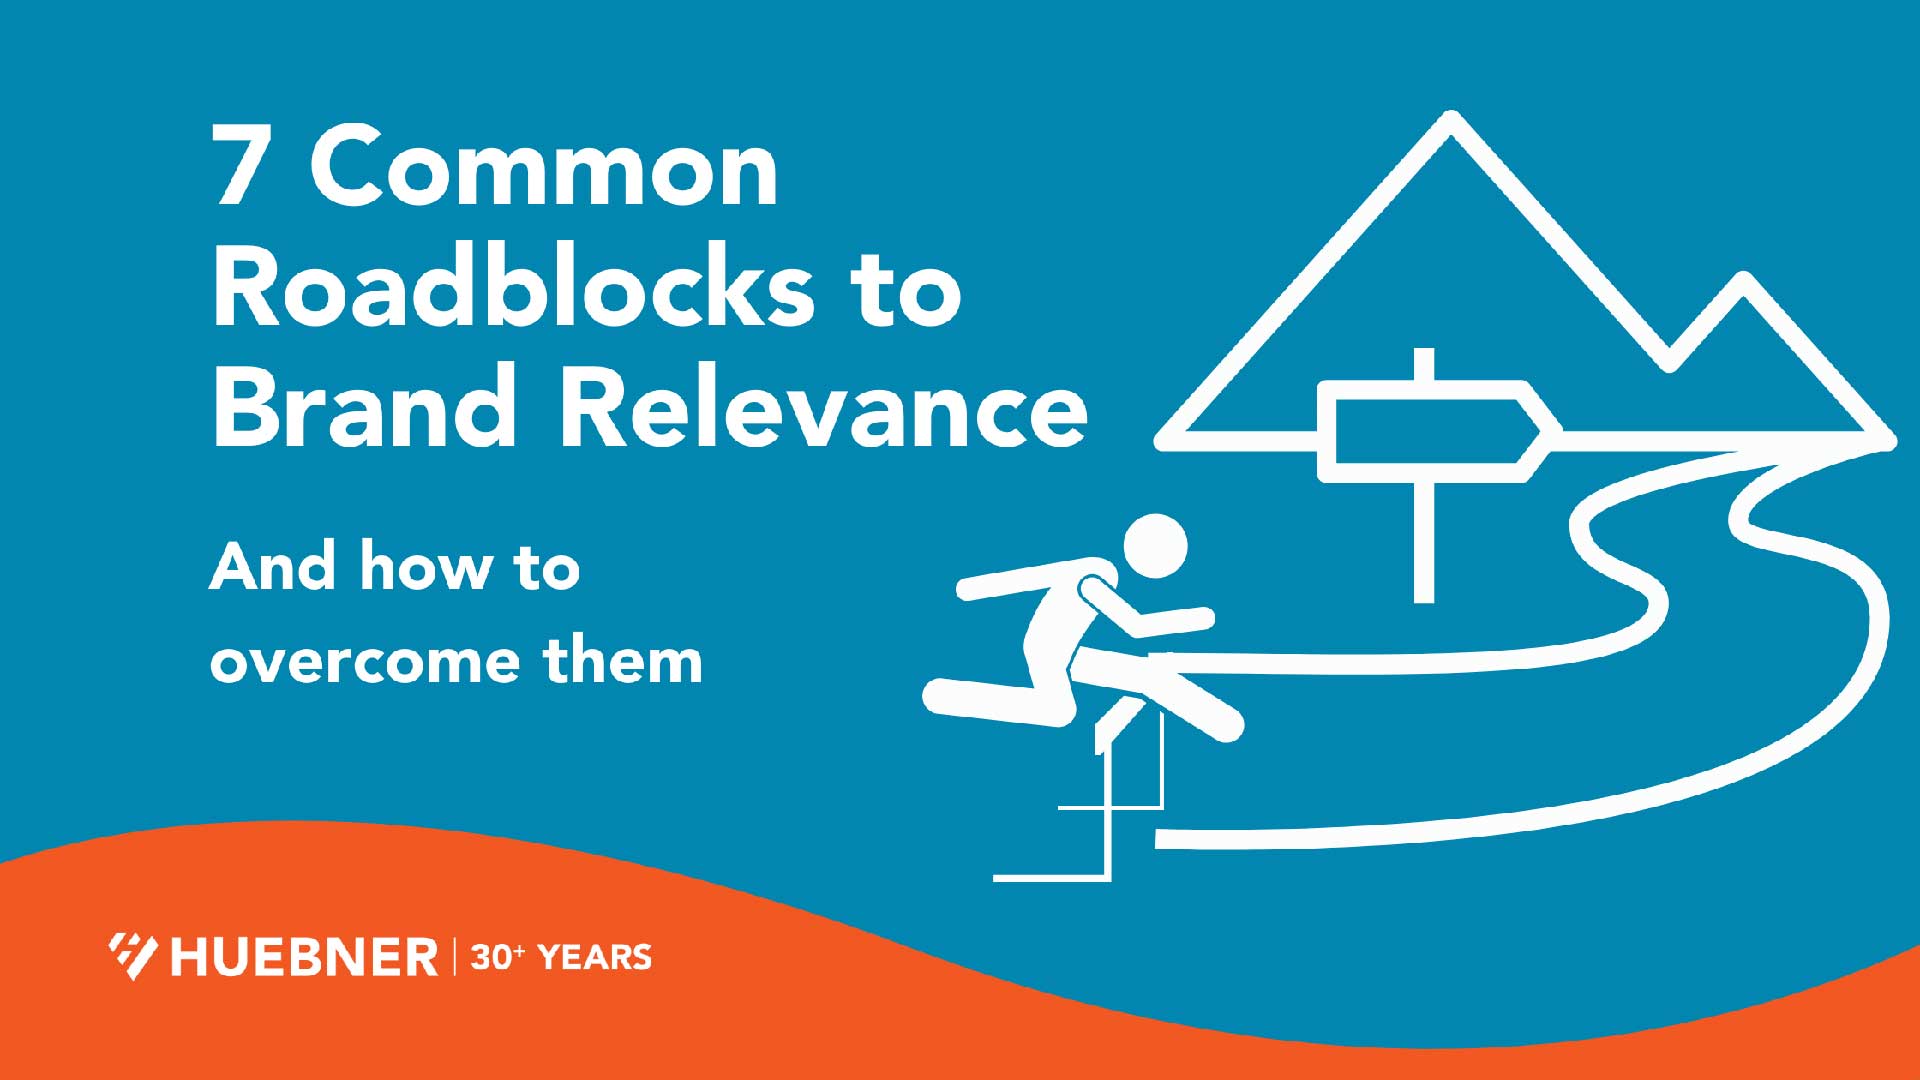 7 Common Roadblocks to Brand Relevance (And How to Overcome Them)